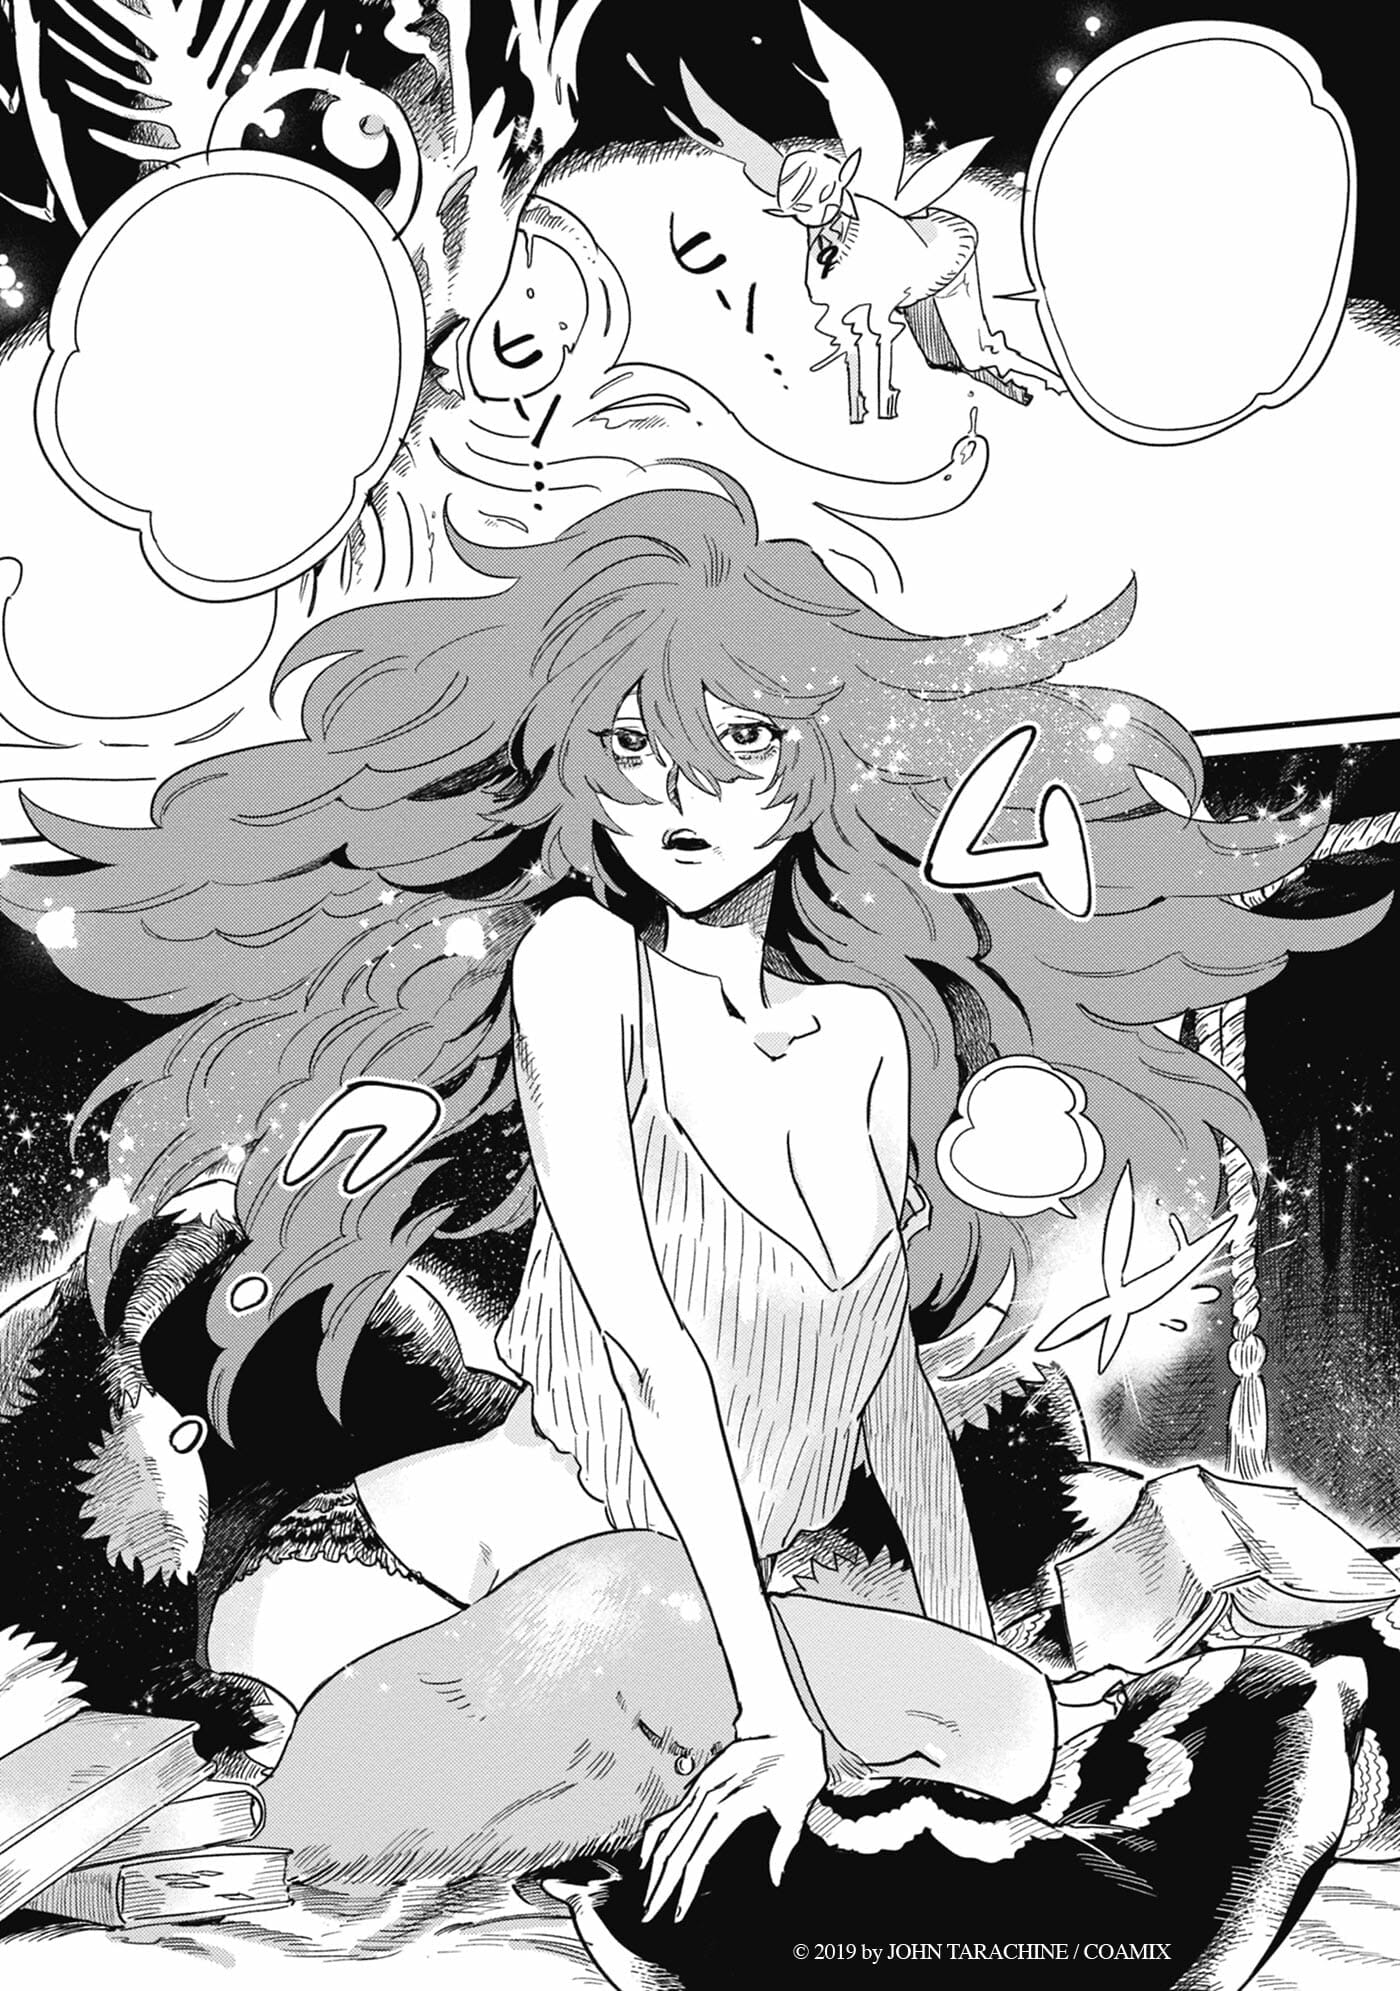 A look inside the manga Witch of Thistle Castle preview